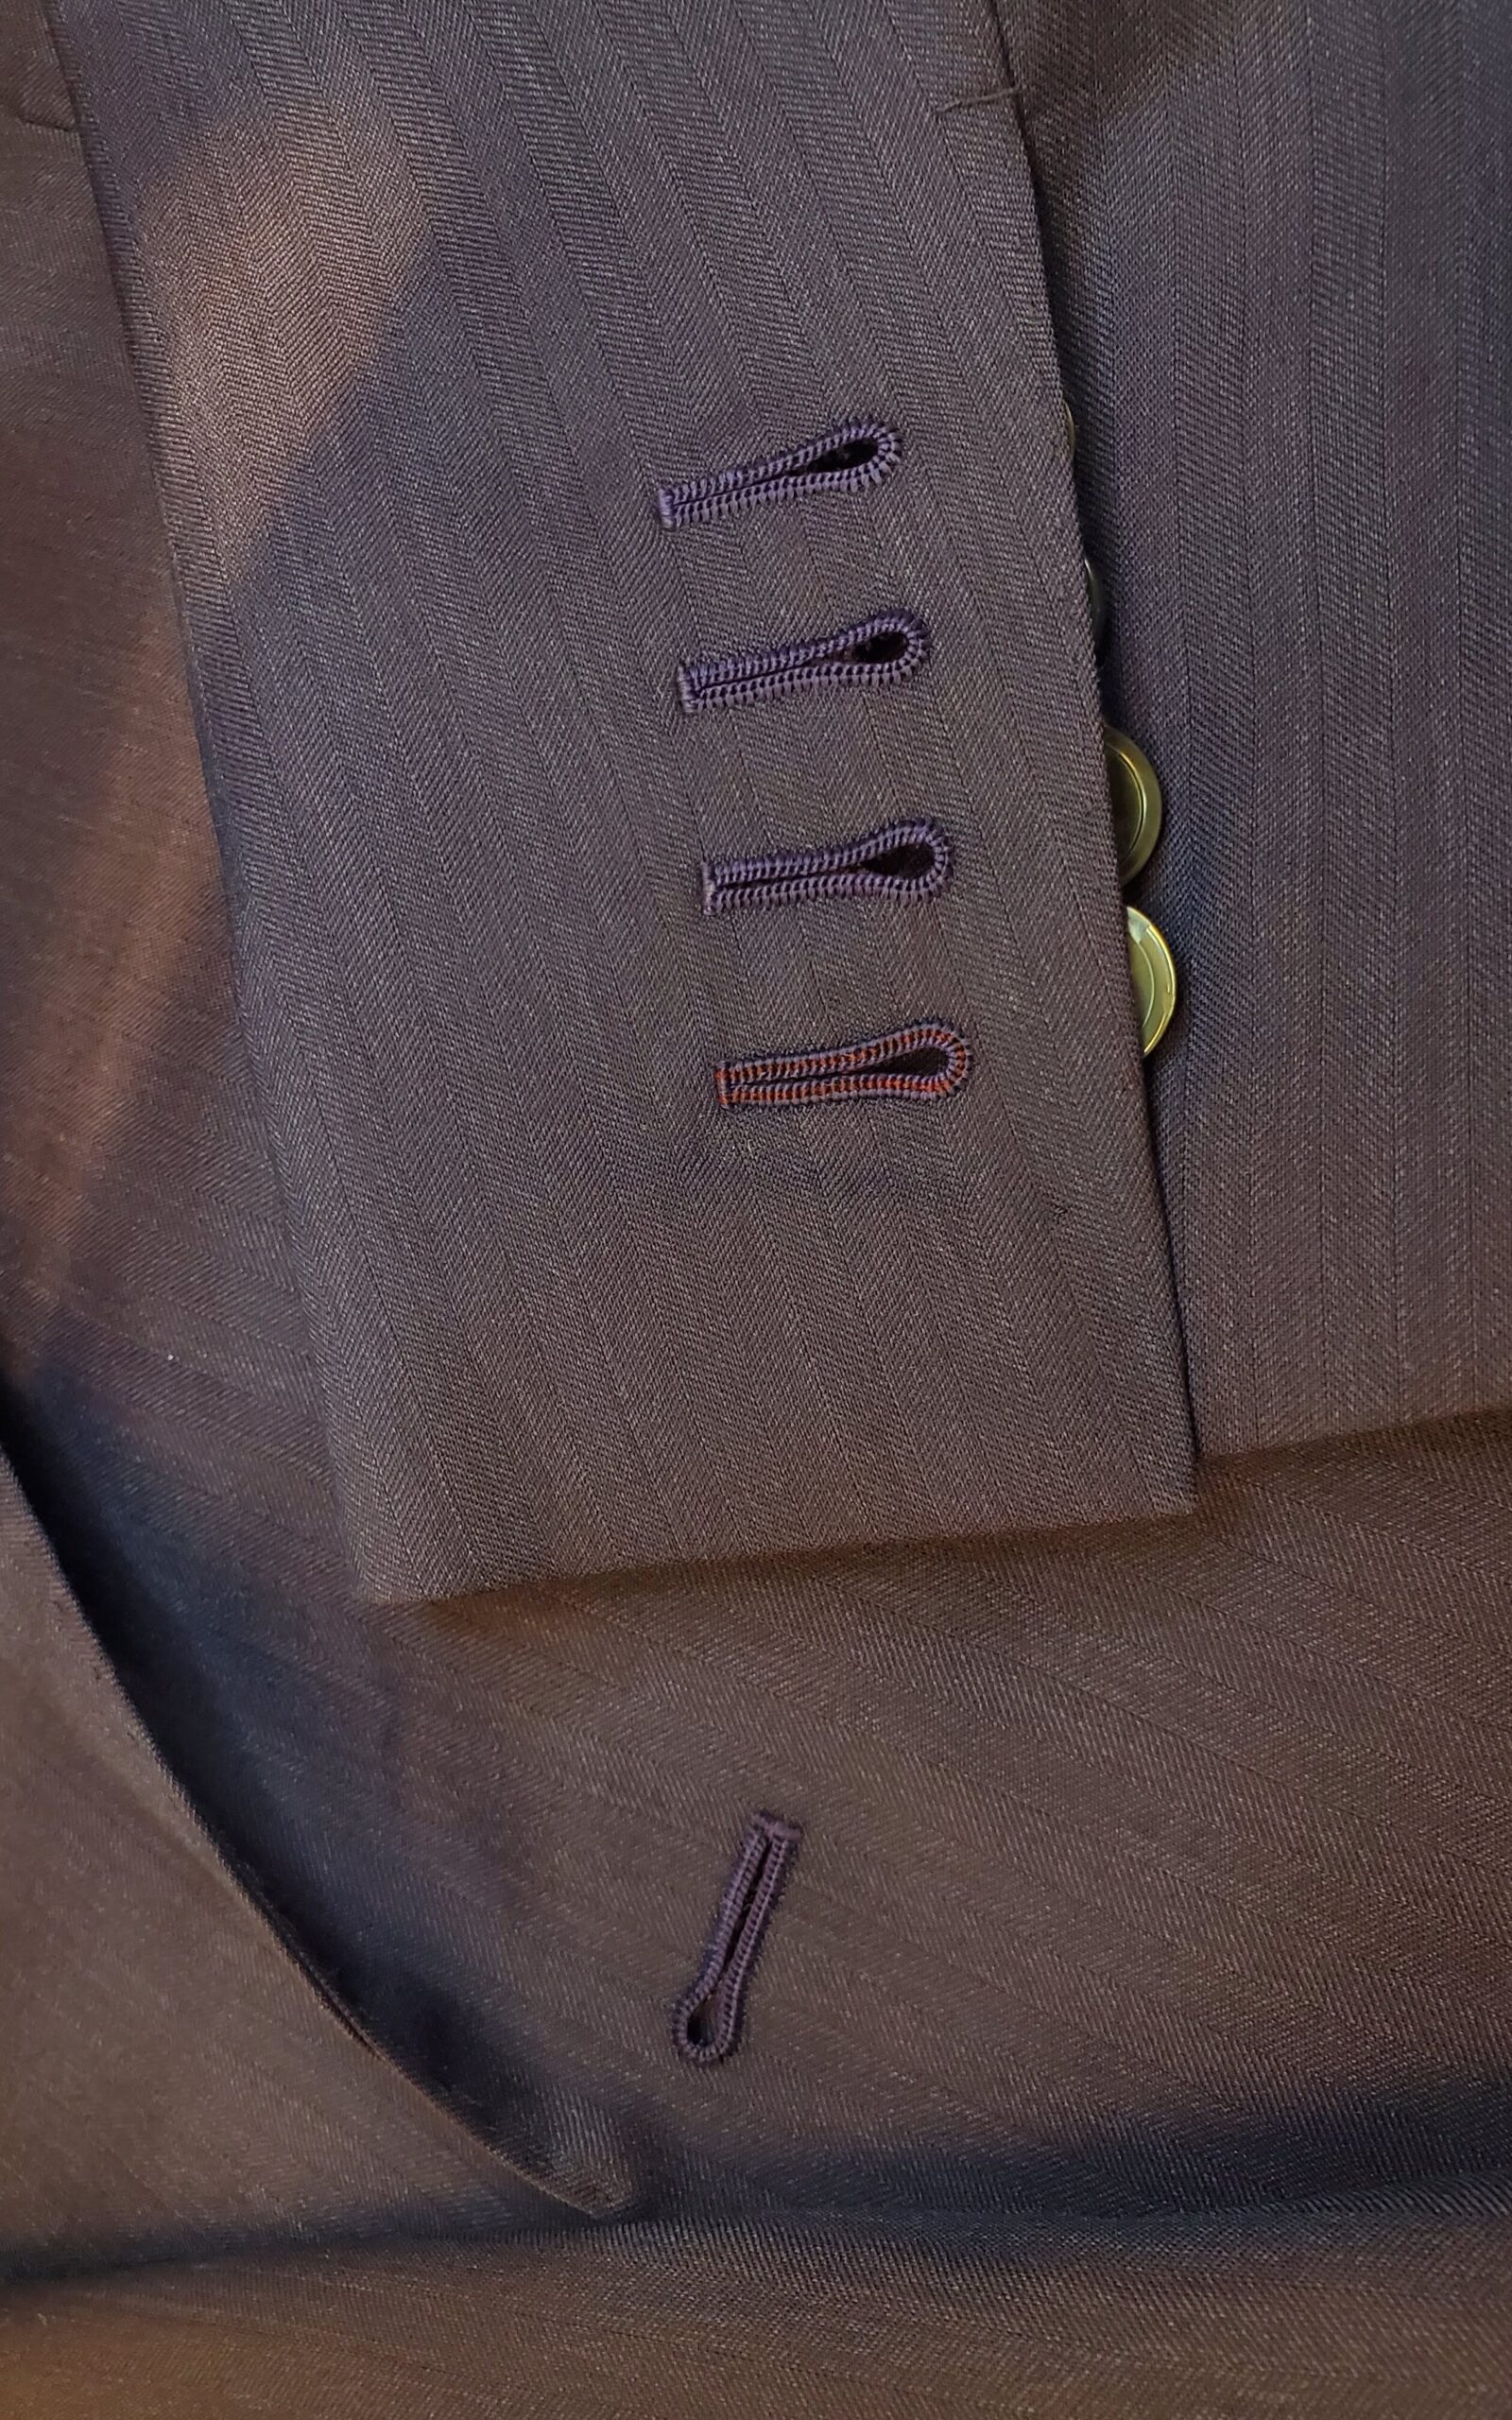 4 hand-sewn buttonholes with contrast thread in one buttonhole